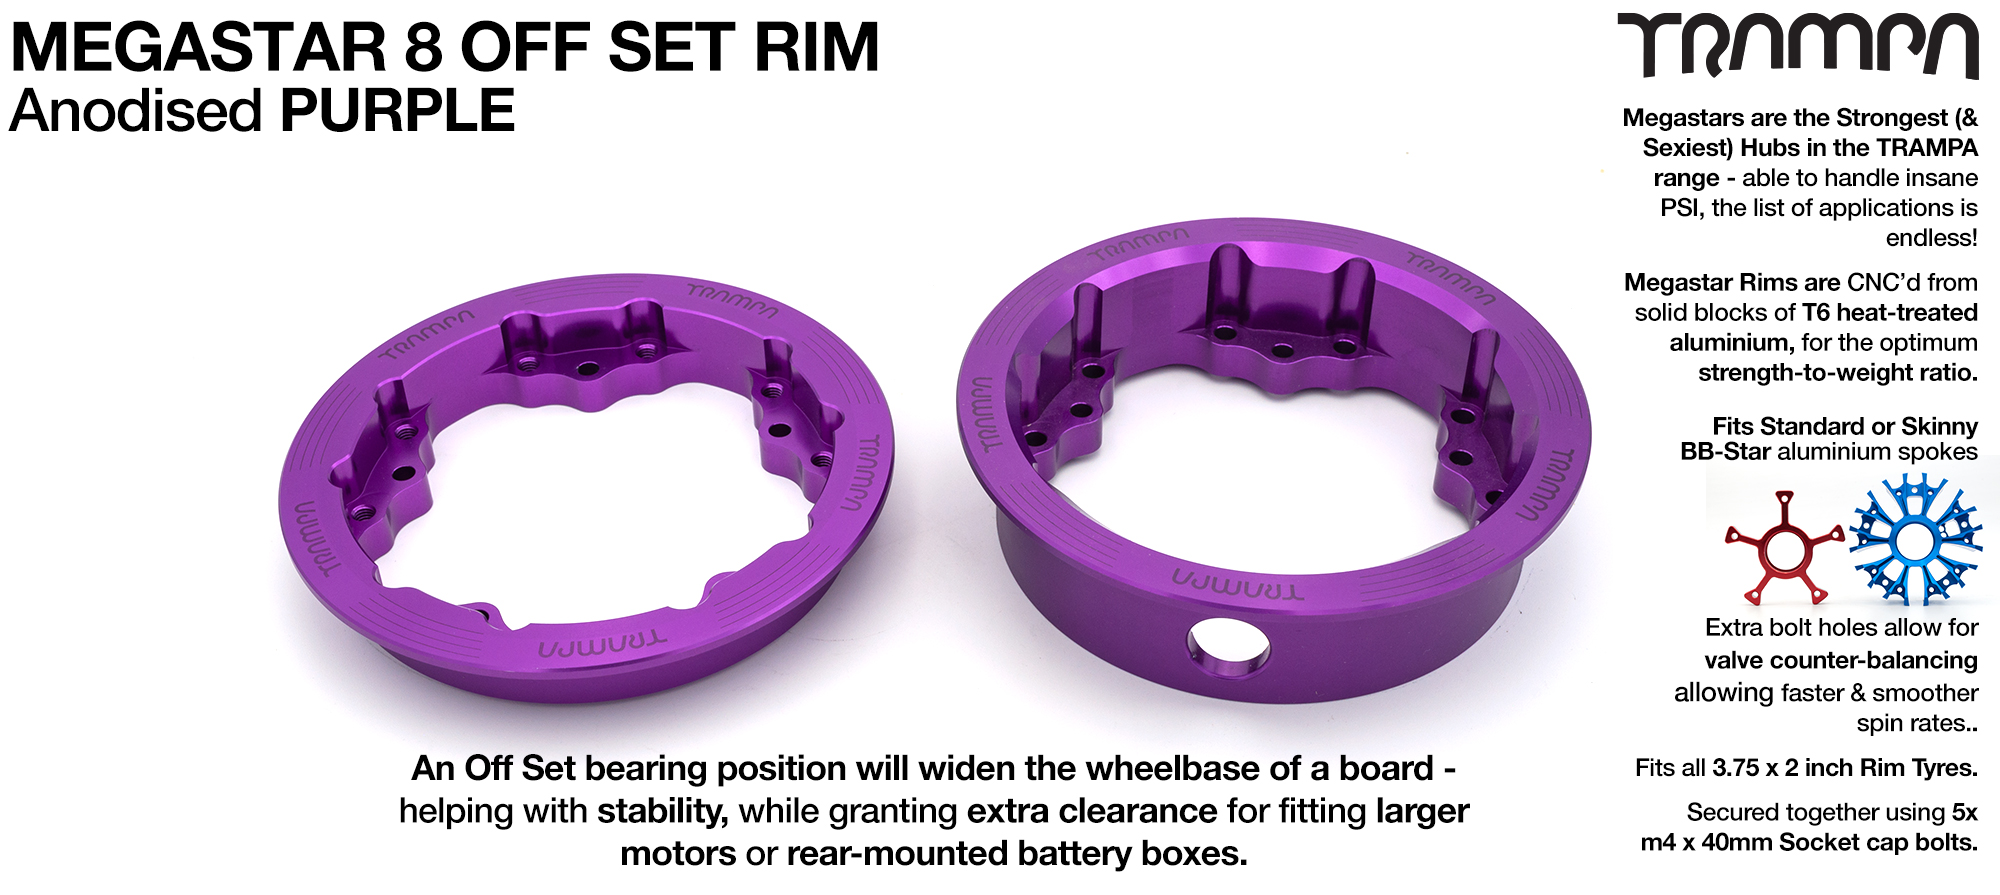 MEGASTAR 8 OS Rims Measure 3.75 x 2 Inch. The bearings are positioned OFF-SET widening the wheel base & accept all 3.75 Rim Tyres - PURPLE 